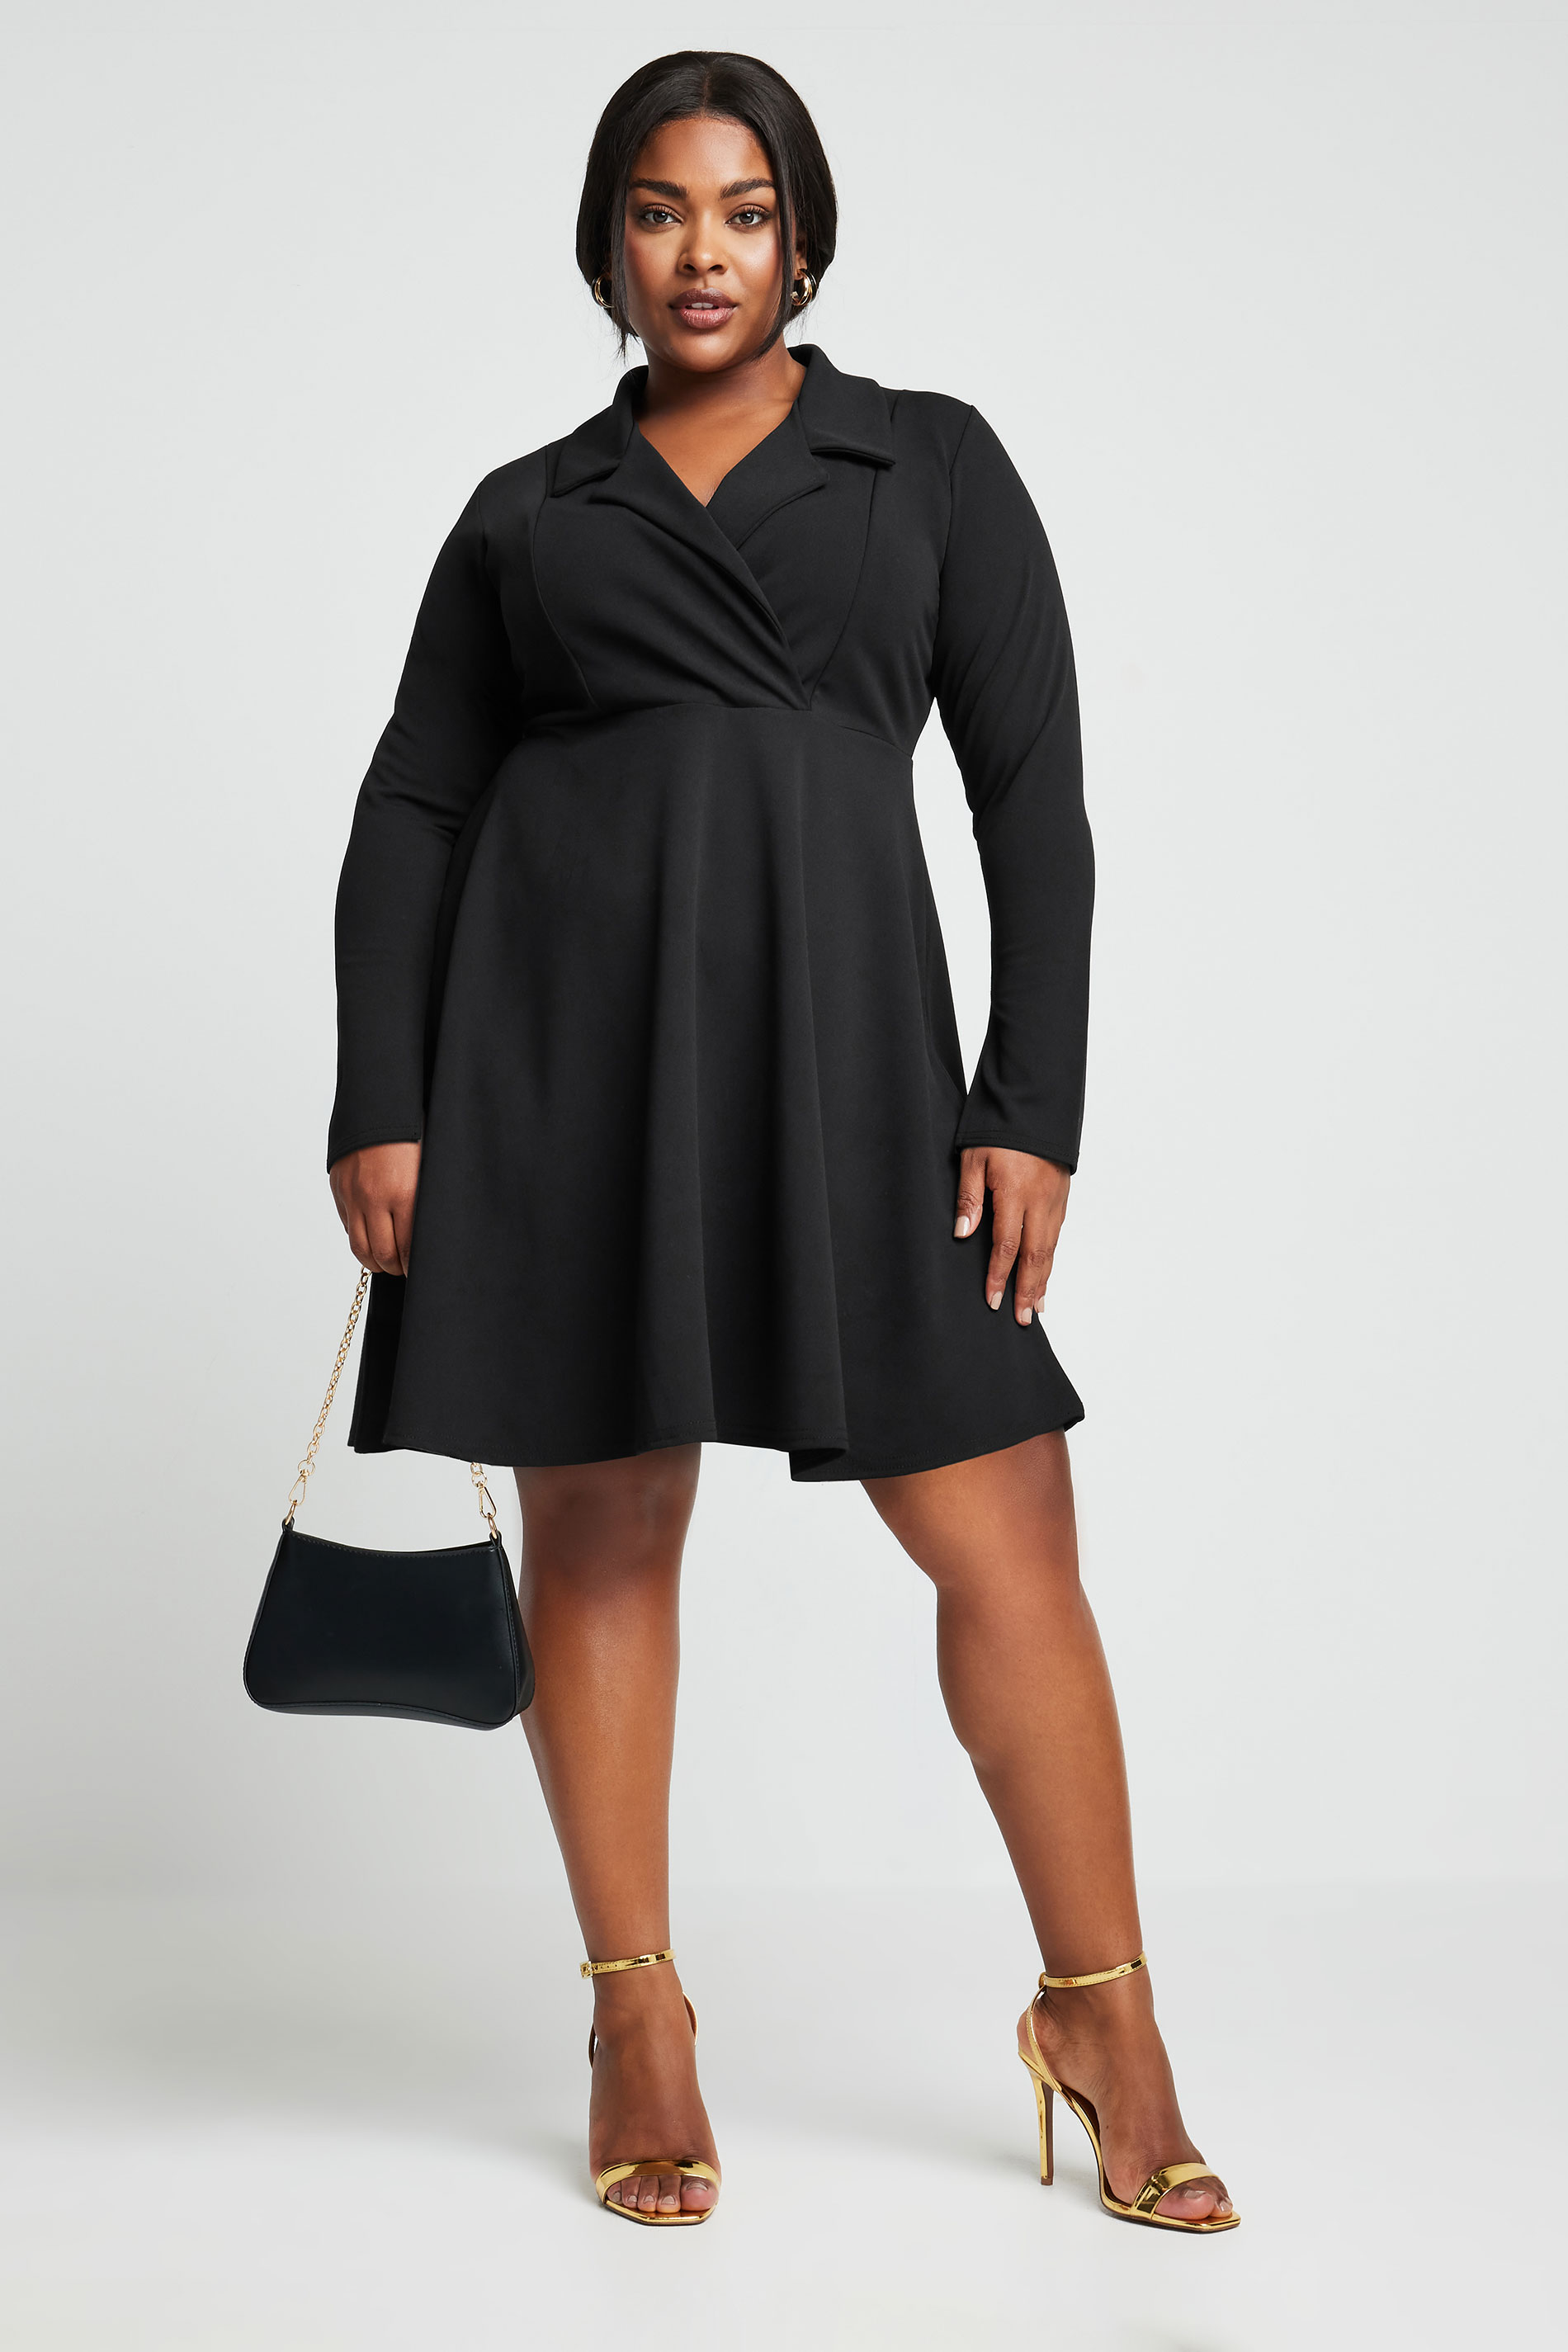 LIMITED COLLECTION Plus Size Black Blazer Style Dress | Yours Clothing 2